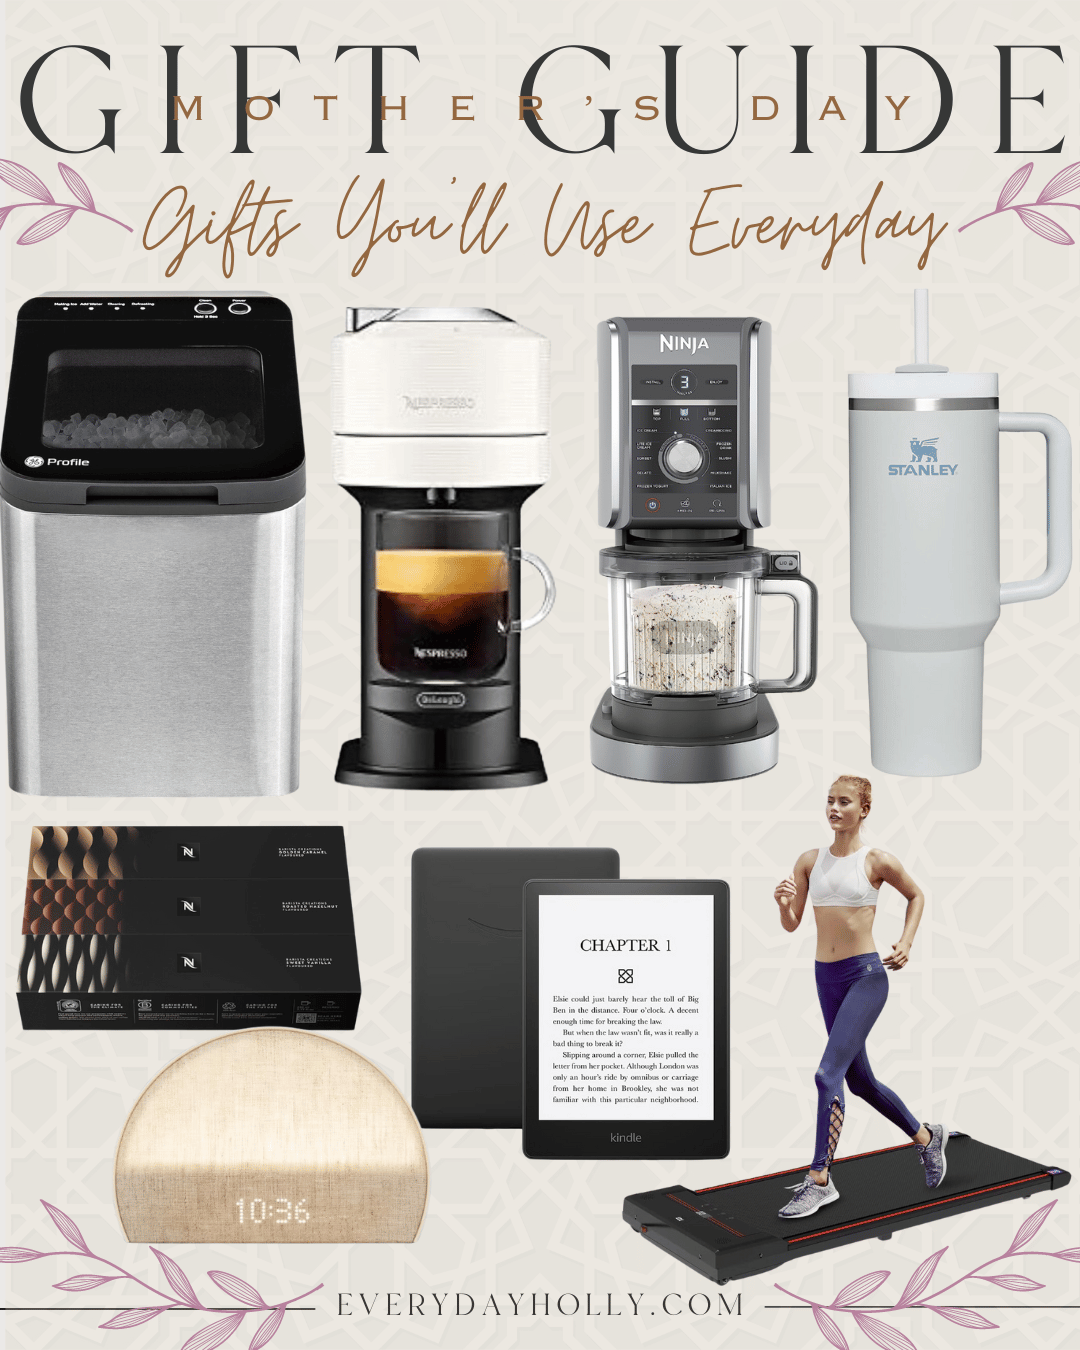 55 gift ideas your mom will love for mother's day | gift guide, gift ideas, mother's day, gifts for her, gifts for mom, kitchen essentials, kitchen gadgets, Stanley, ice maker, nespresso, ninja creami, walking pad